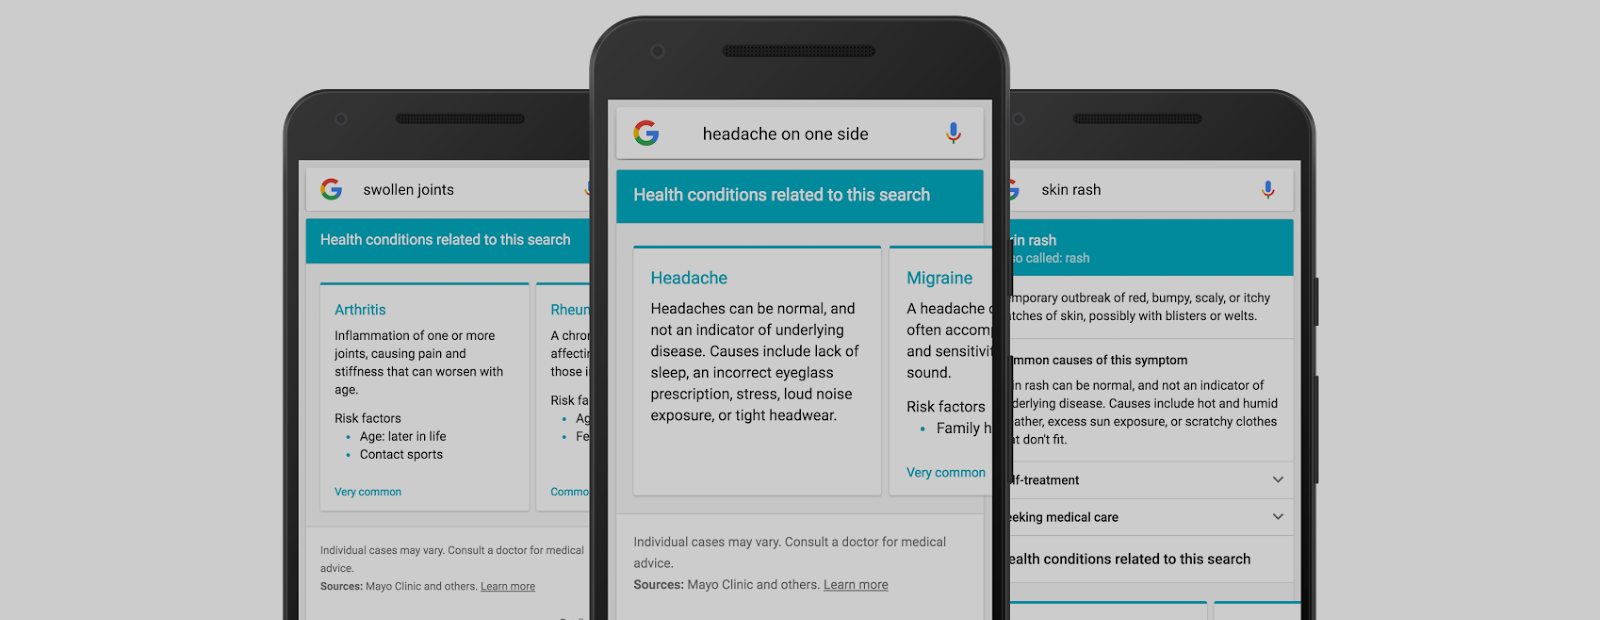 Google Rolling Out “Symptom Search” Feature In Effort To Simplify Medical Queries